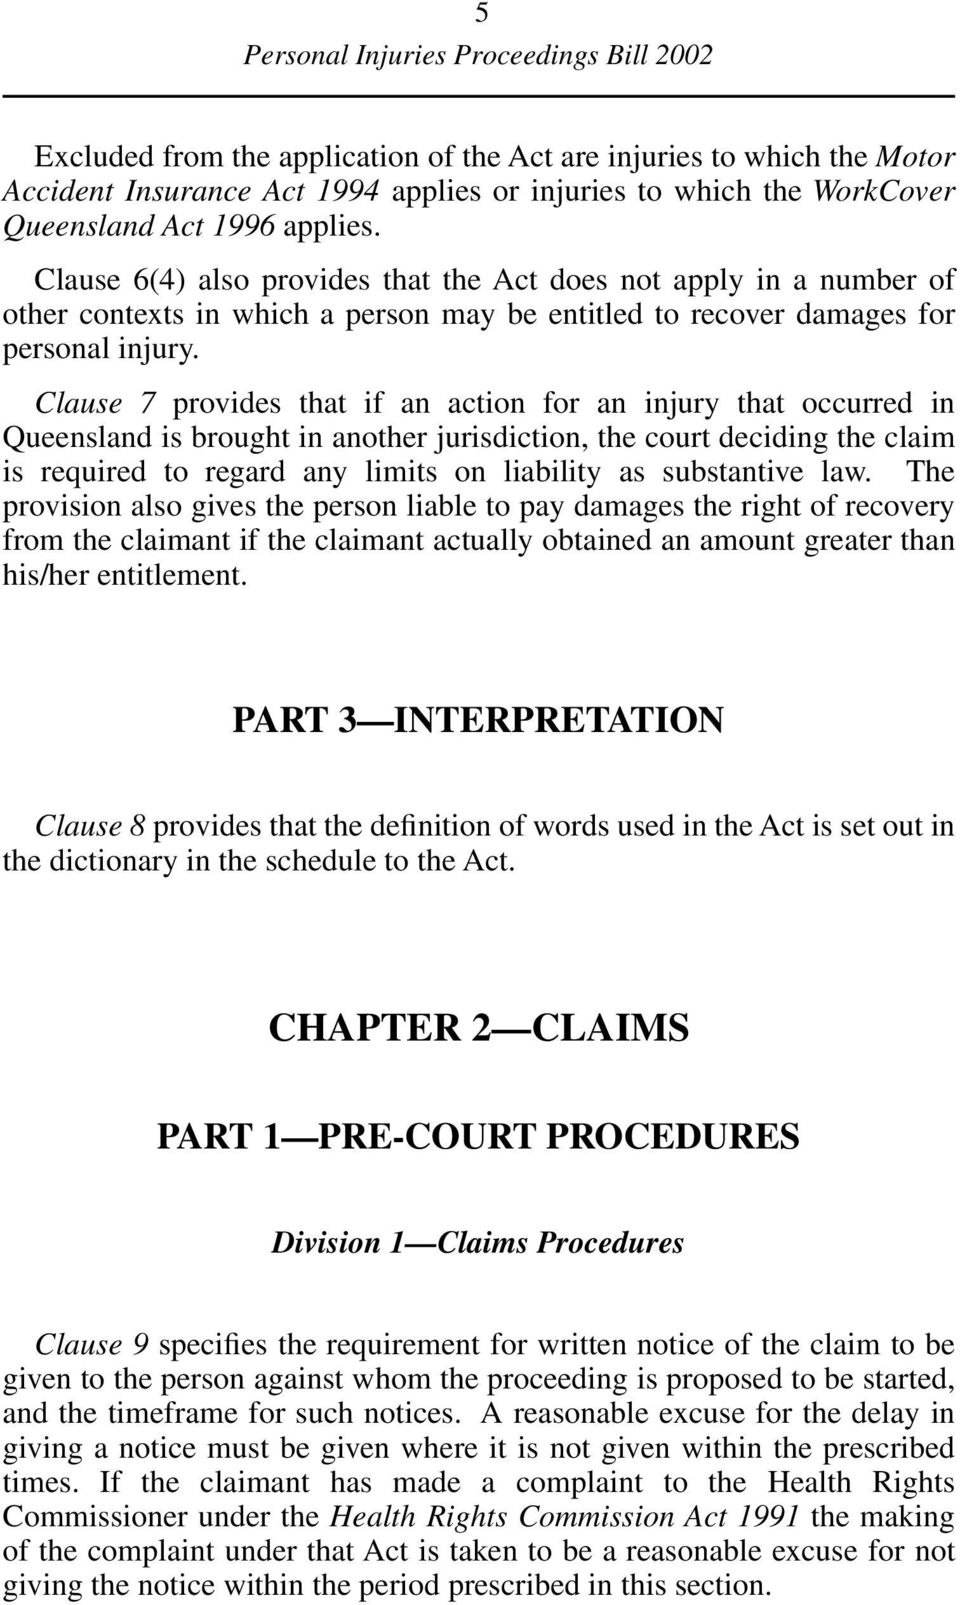 Clause 7 provides that if an action for an injury that occurred in Queensland is brought in another jurisdiction, the court deciding the claim is required to regard any limits on liability as